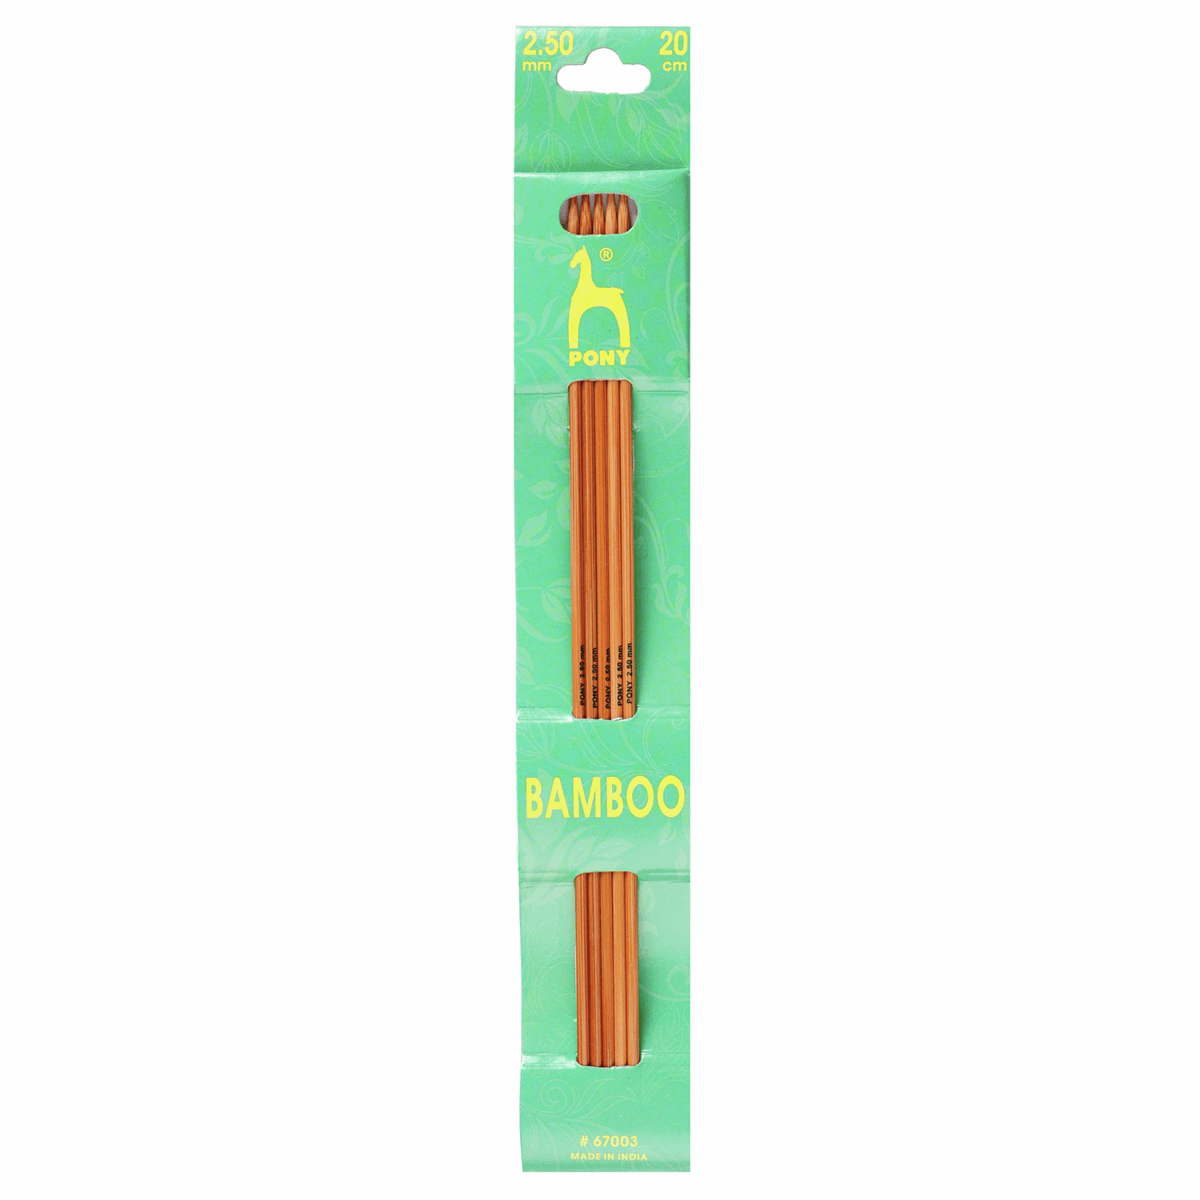 PONY Double-Ended Bamboo Knitting Pins - 20cm x 2.50mm (Set of 5)